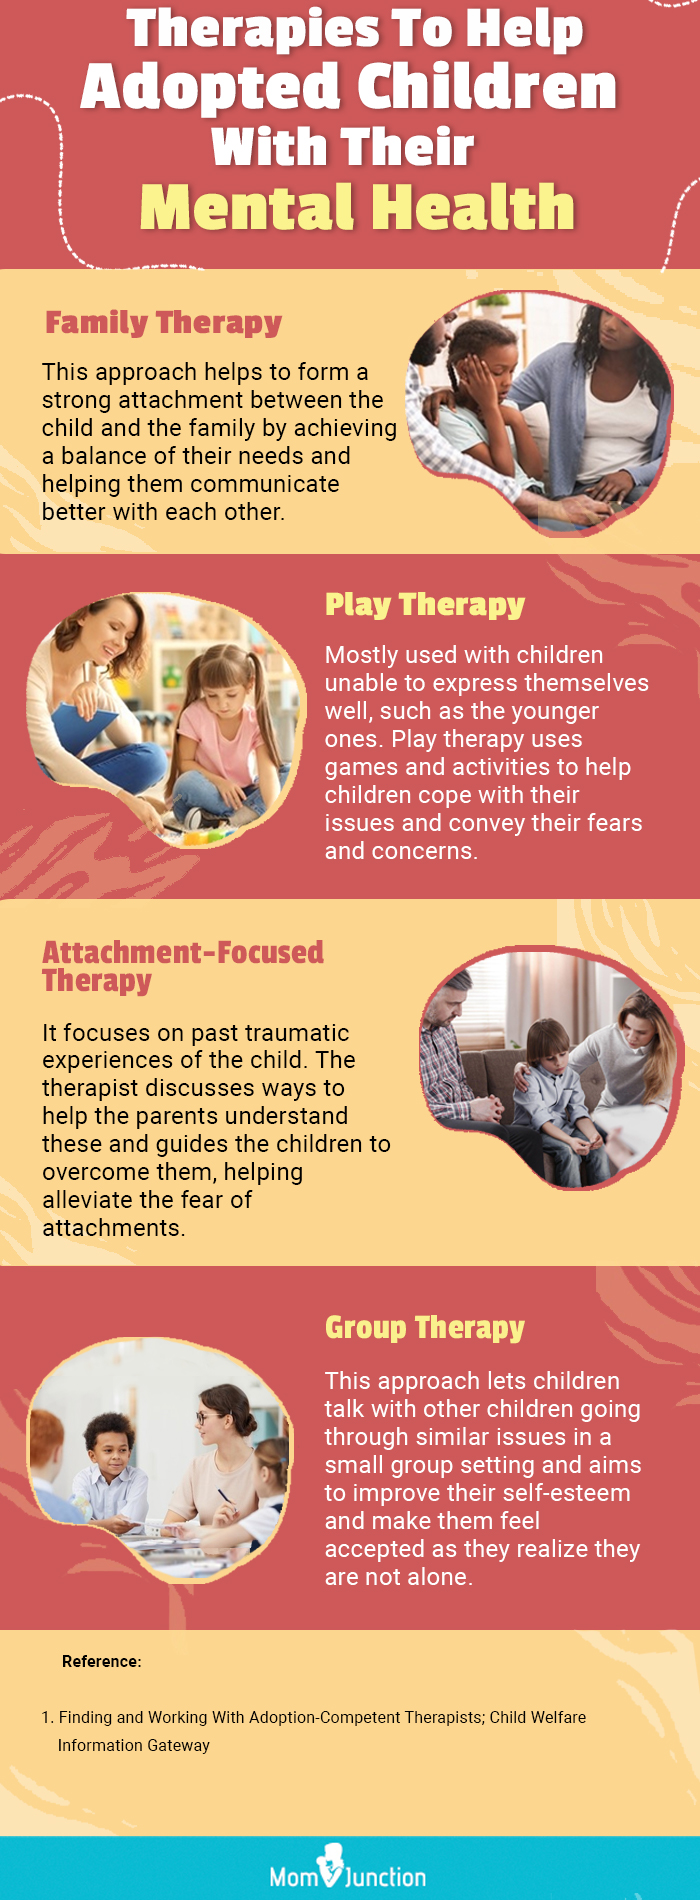 therapies to help adopted children with their mental health (infographic)